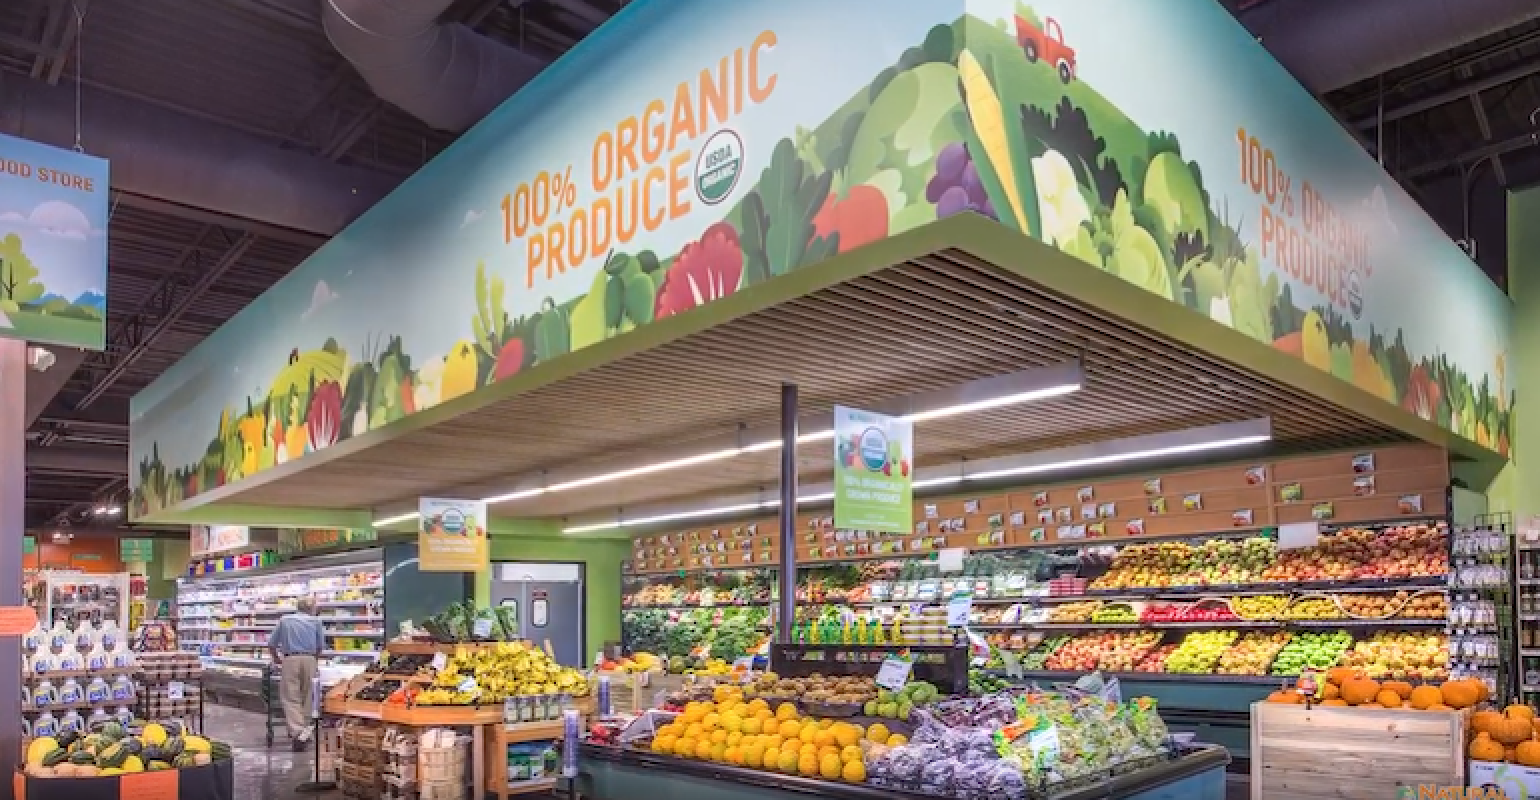 https://www.supermarketnews.com/sites/supermarketnews.com/files/styles/article_featured_retina/public/Natural_Grocers-organic_produce_section-1.png?itok=ZryRJwOH